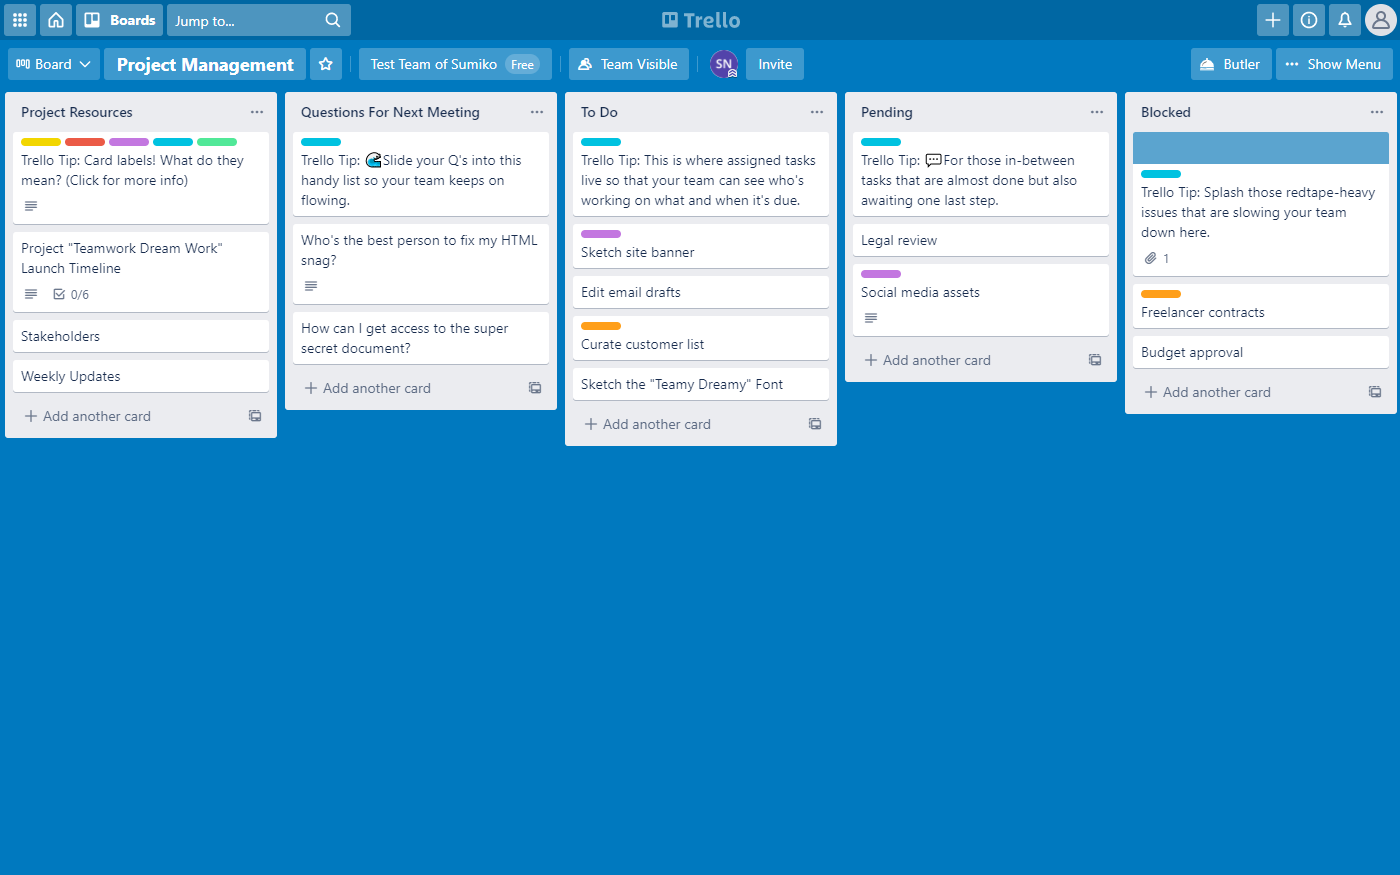 Project management tool for startups Trello